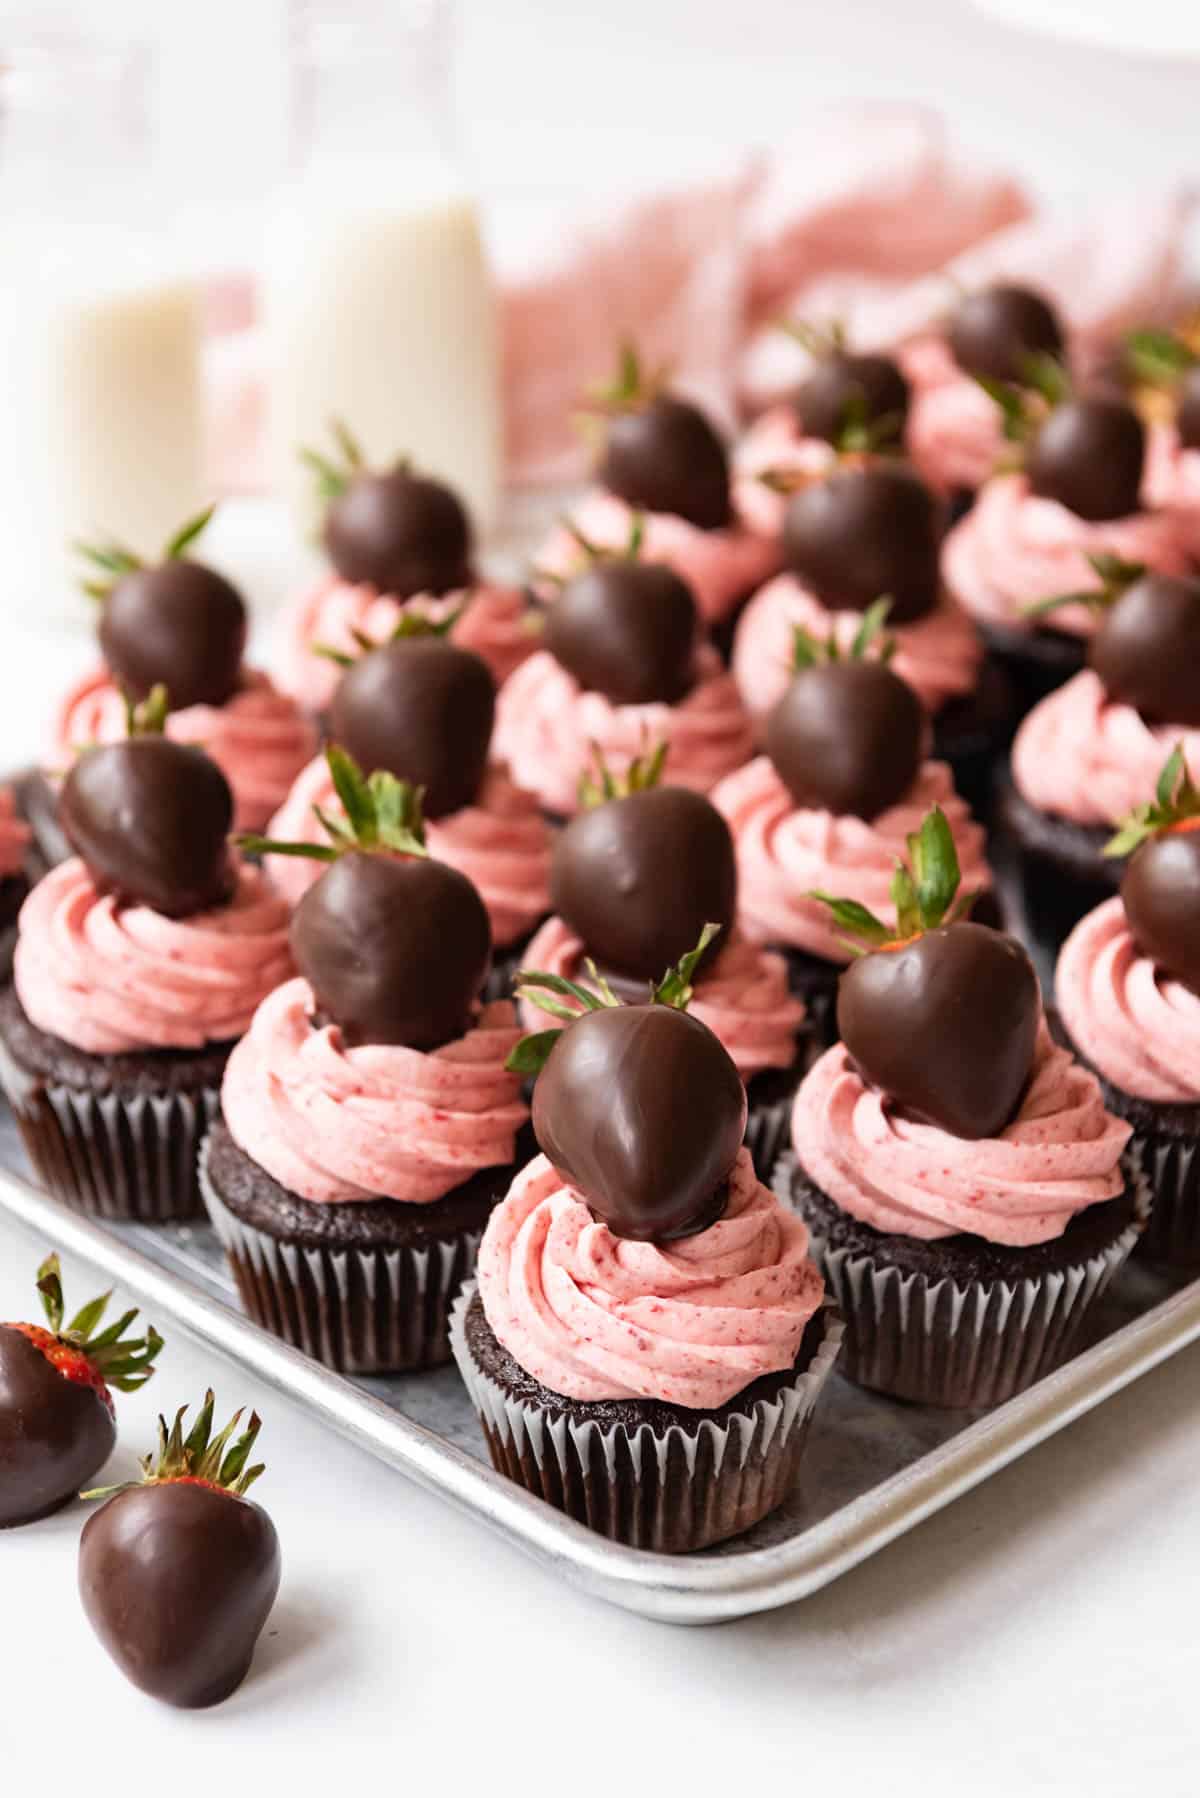 Rows of finished chocolate covered strawberry cupcakes decorated with chocolate covered strawberries on top.